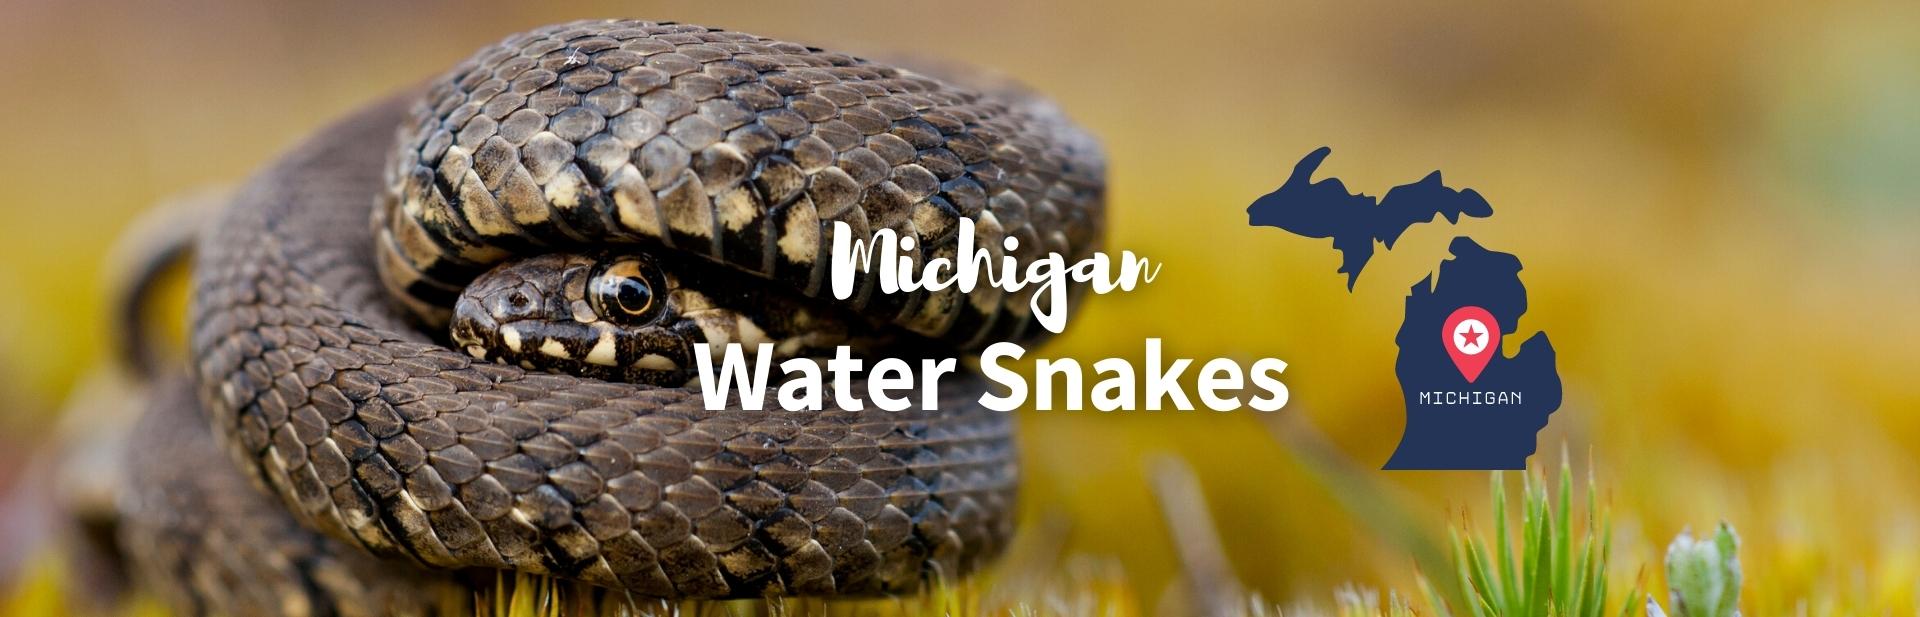 The 3 Michigan Water Snakes: ID Guide with Pictures and Facts